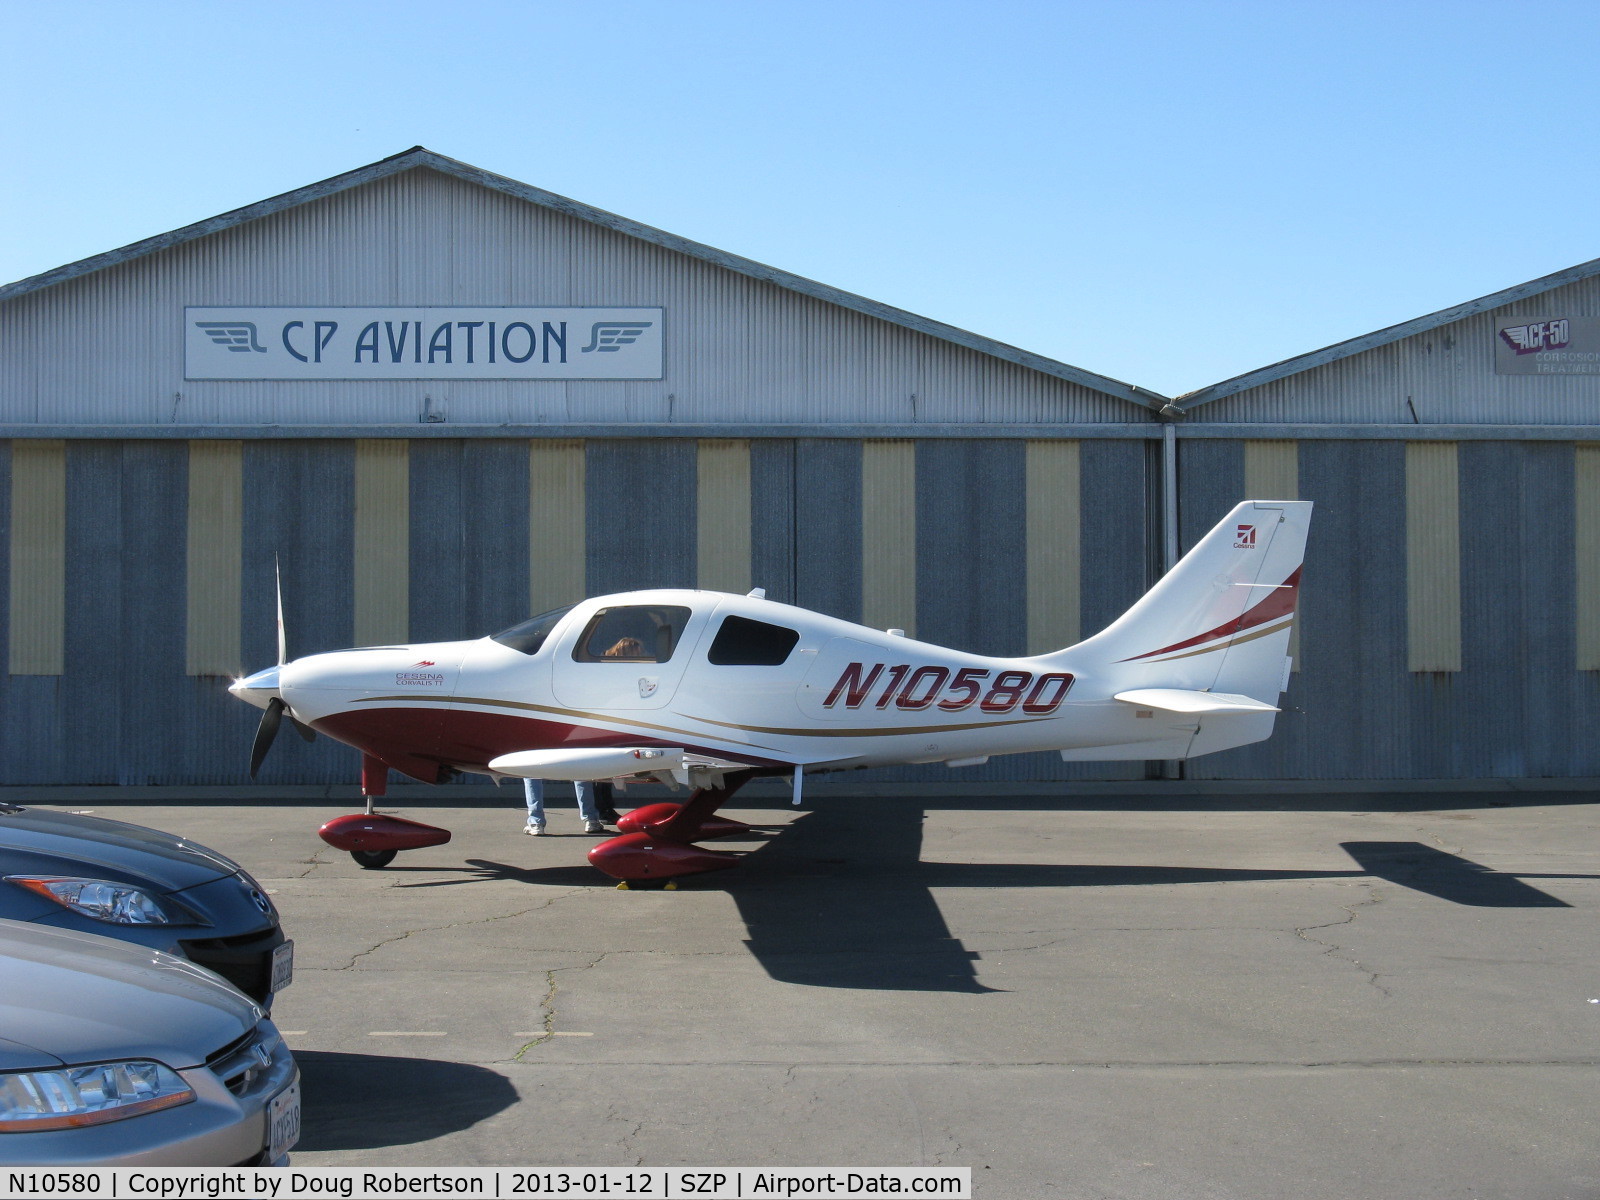 N10580, Cessna LC41-550FG C/N 411150, 2009 Cessna LC41-550FG as 400 CORVALIS TT, twin-turbocharged Continental TSIO-550-C with two intercoolers 310 Hp, claimed in 2004 debut to be fastest single in certified mass production. Lancair>Columbia> Cessna heritage.